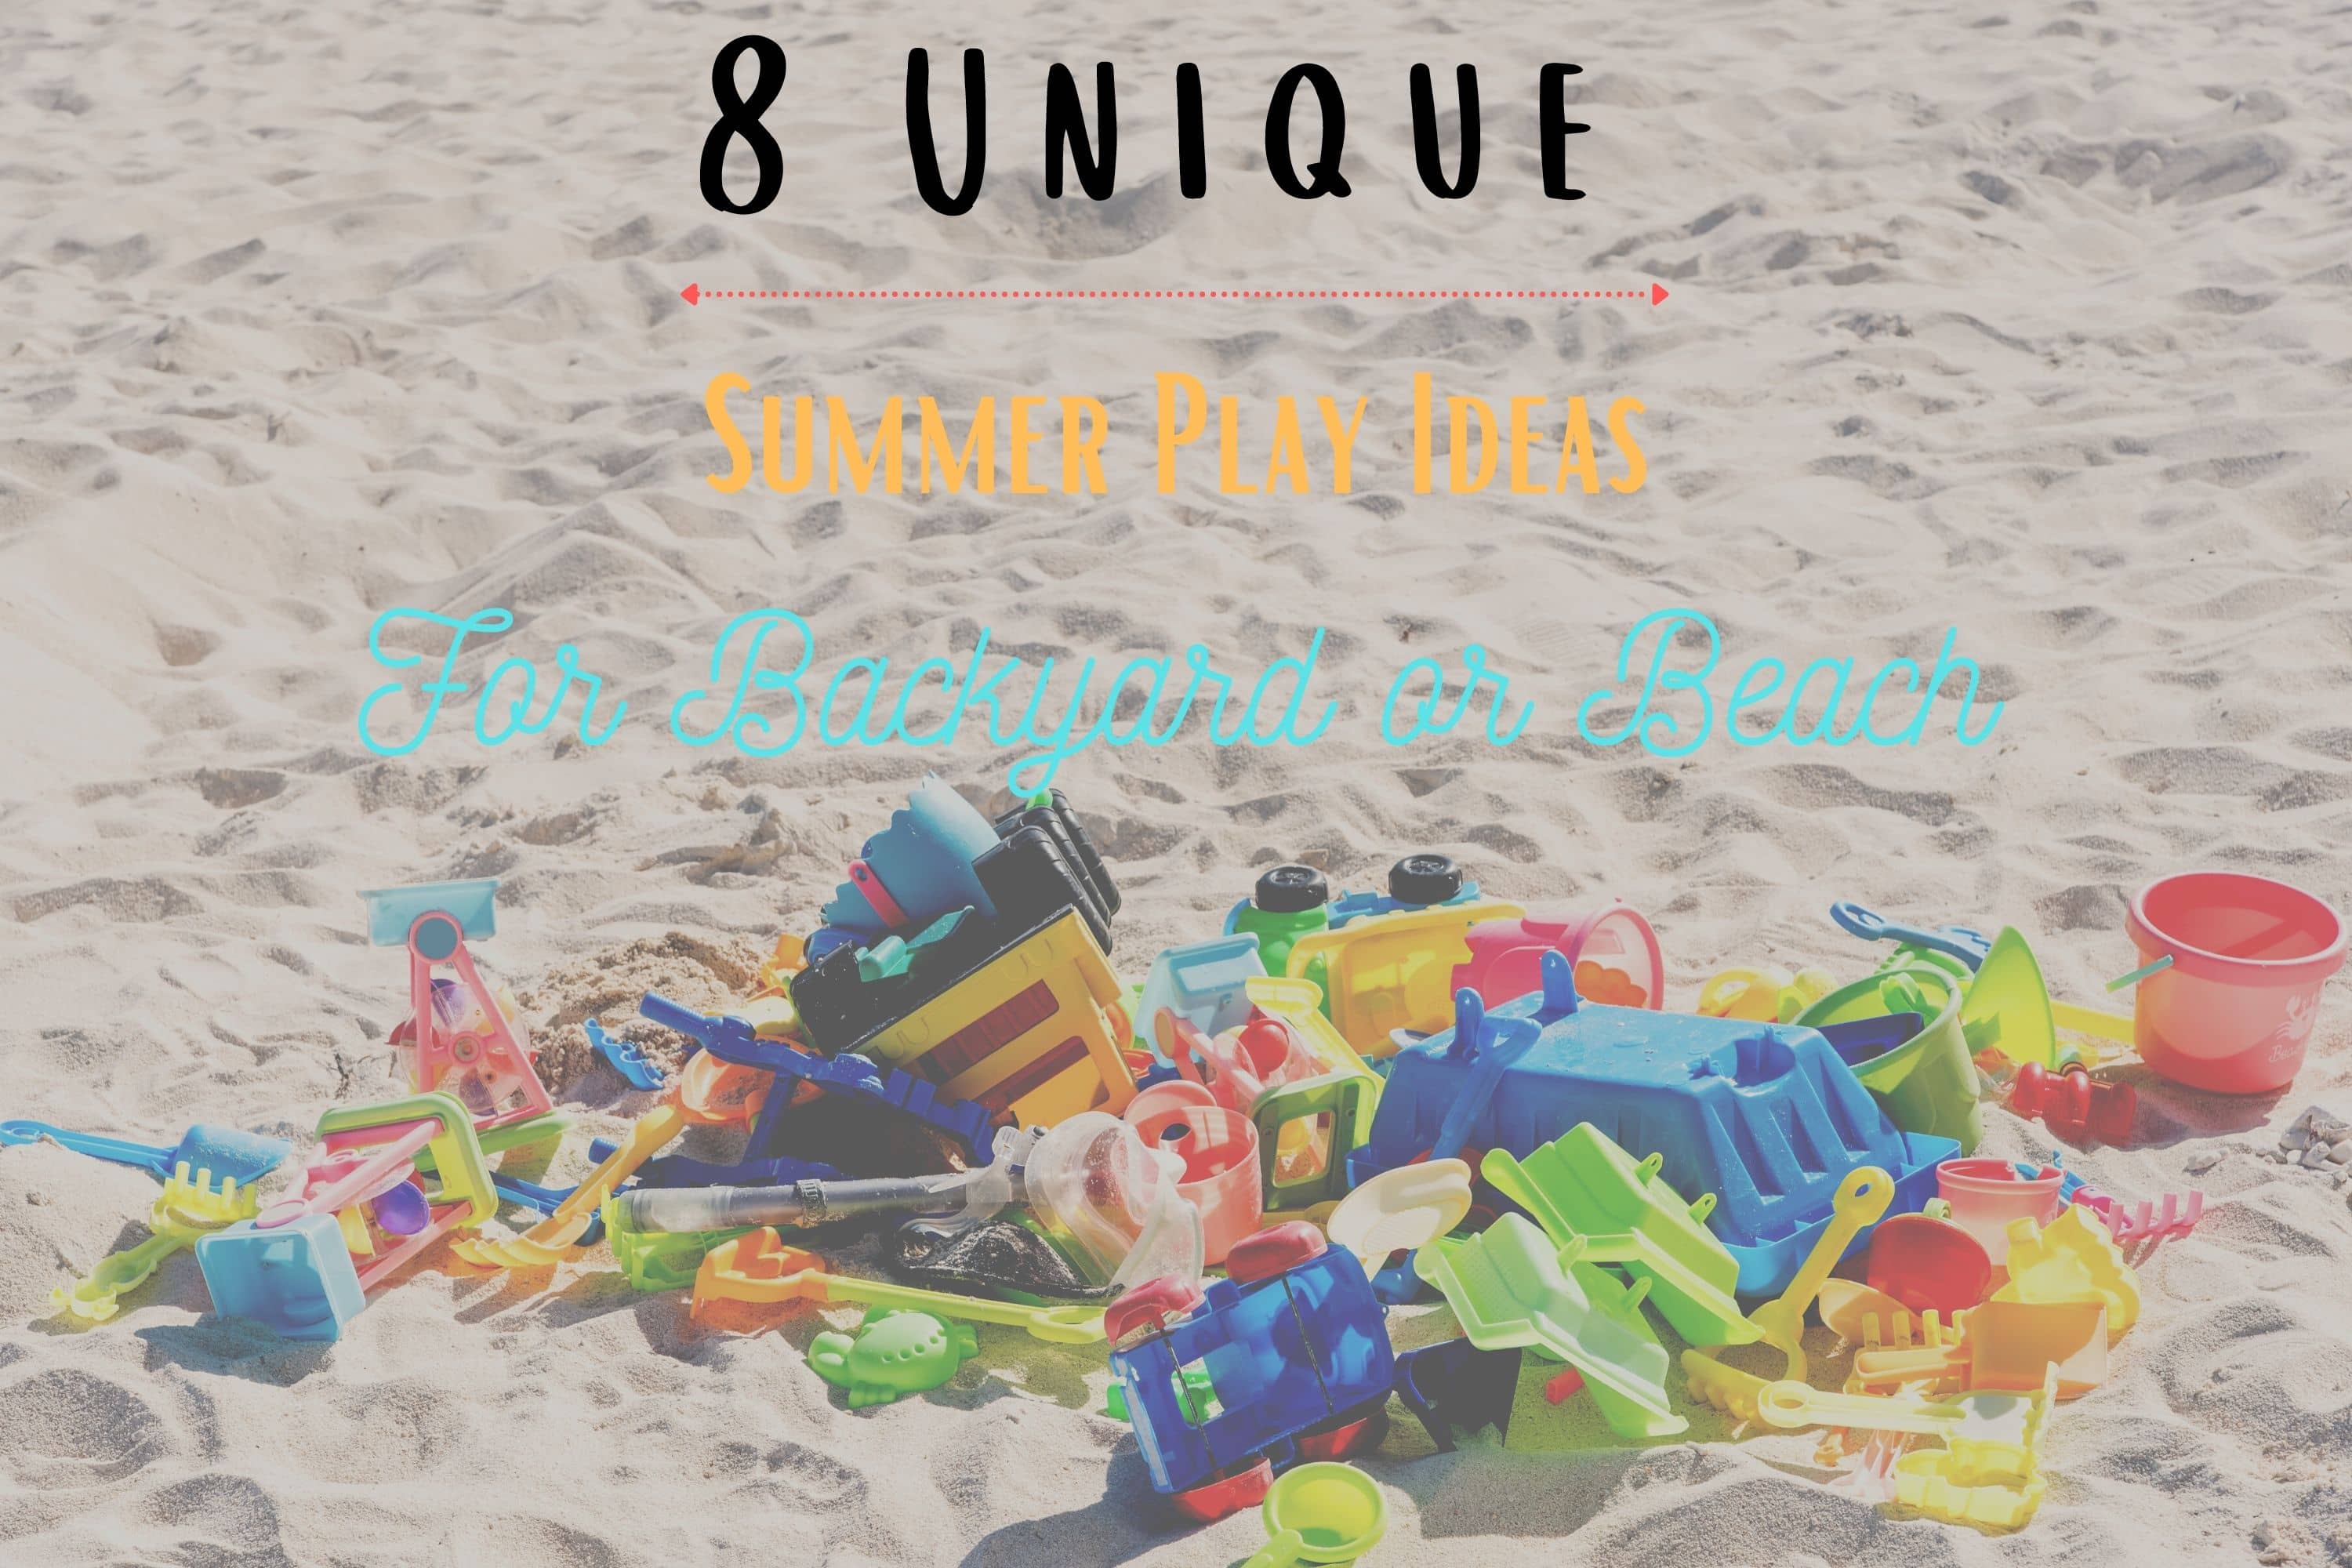 a pile of toys in the sand including plastic shovels, pails dump trucks, and sand castle molds. Text covers the picture that say 8 unique summer play ideas for backyard or beach